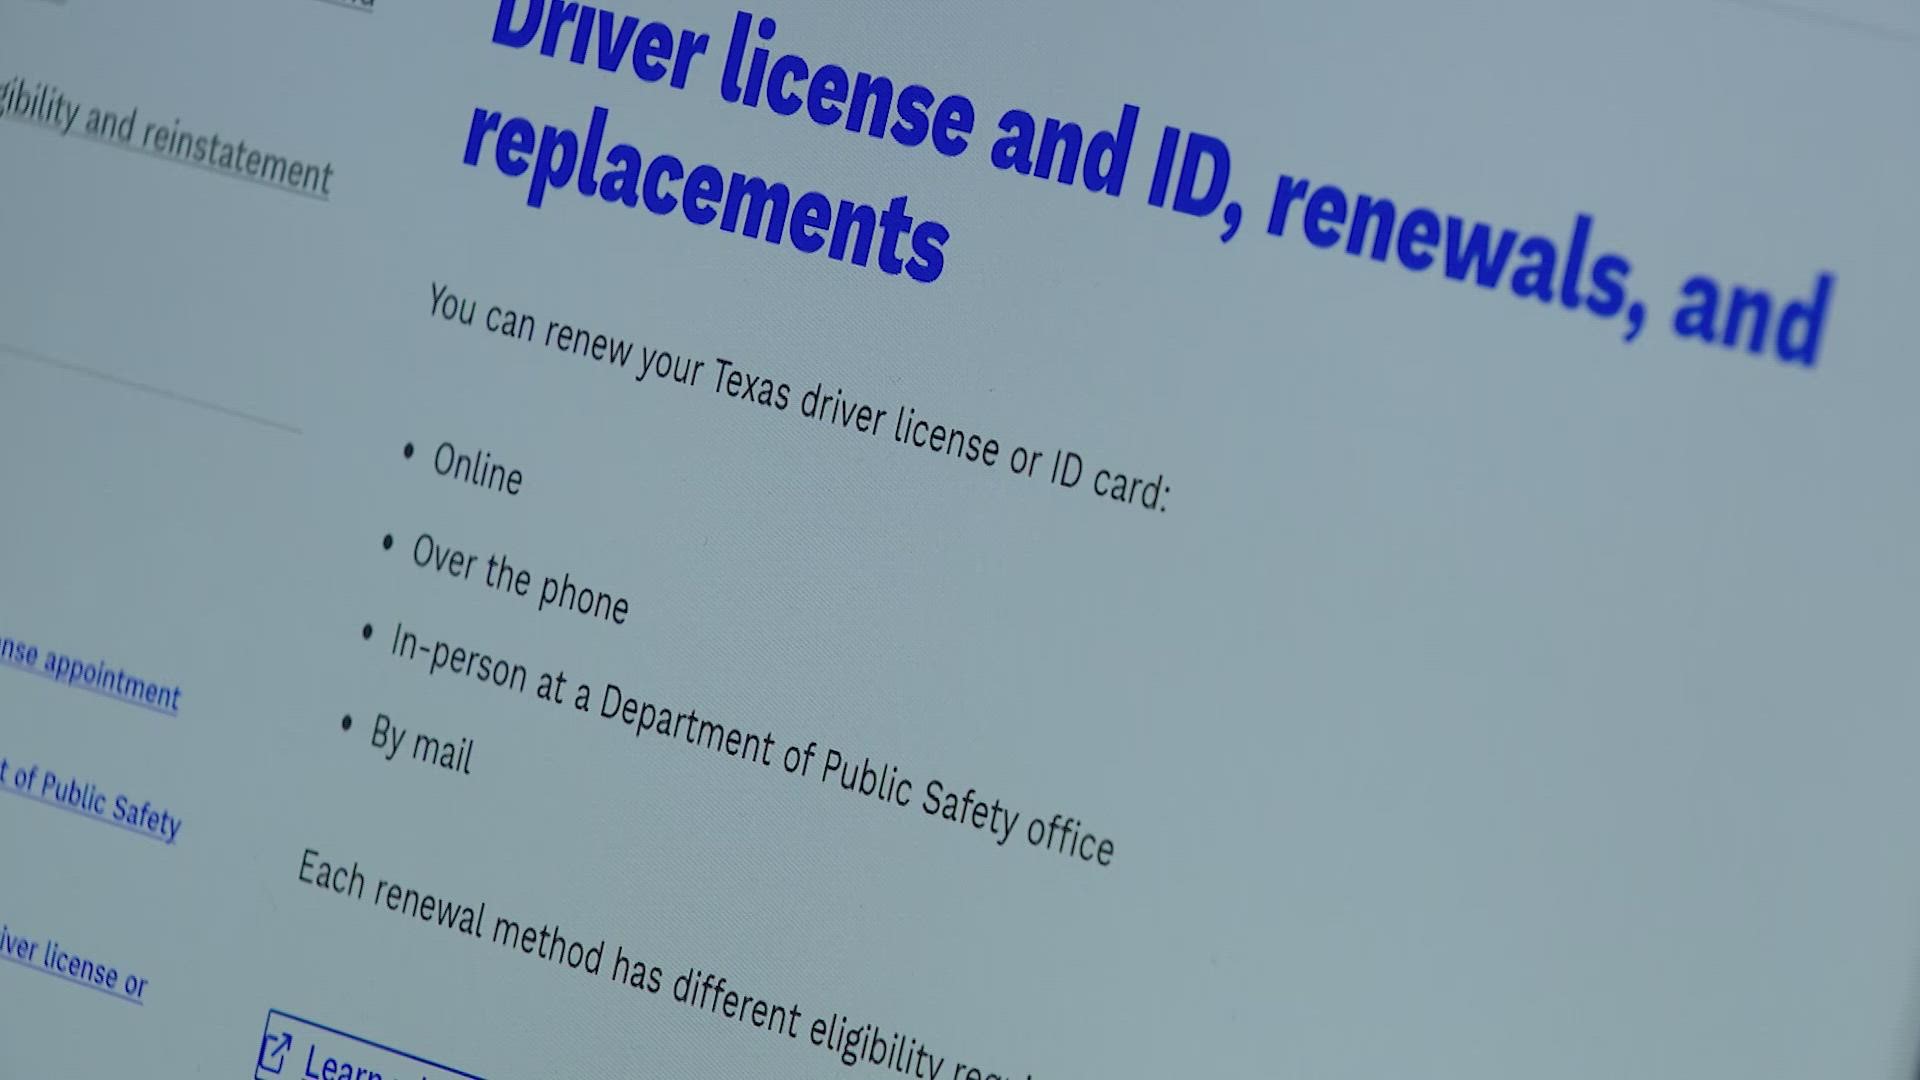 The head of the Texas Department of Public Safety said 3,000 Asian Texans were targeted in an ID theft ring and their driver's licenses were stolen.